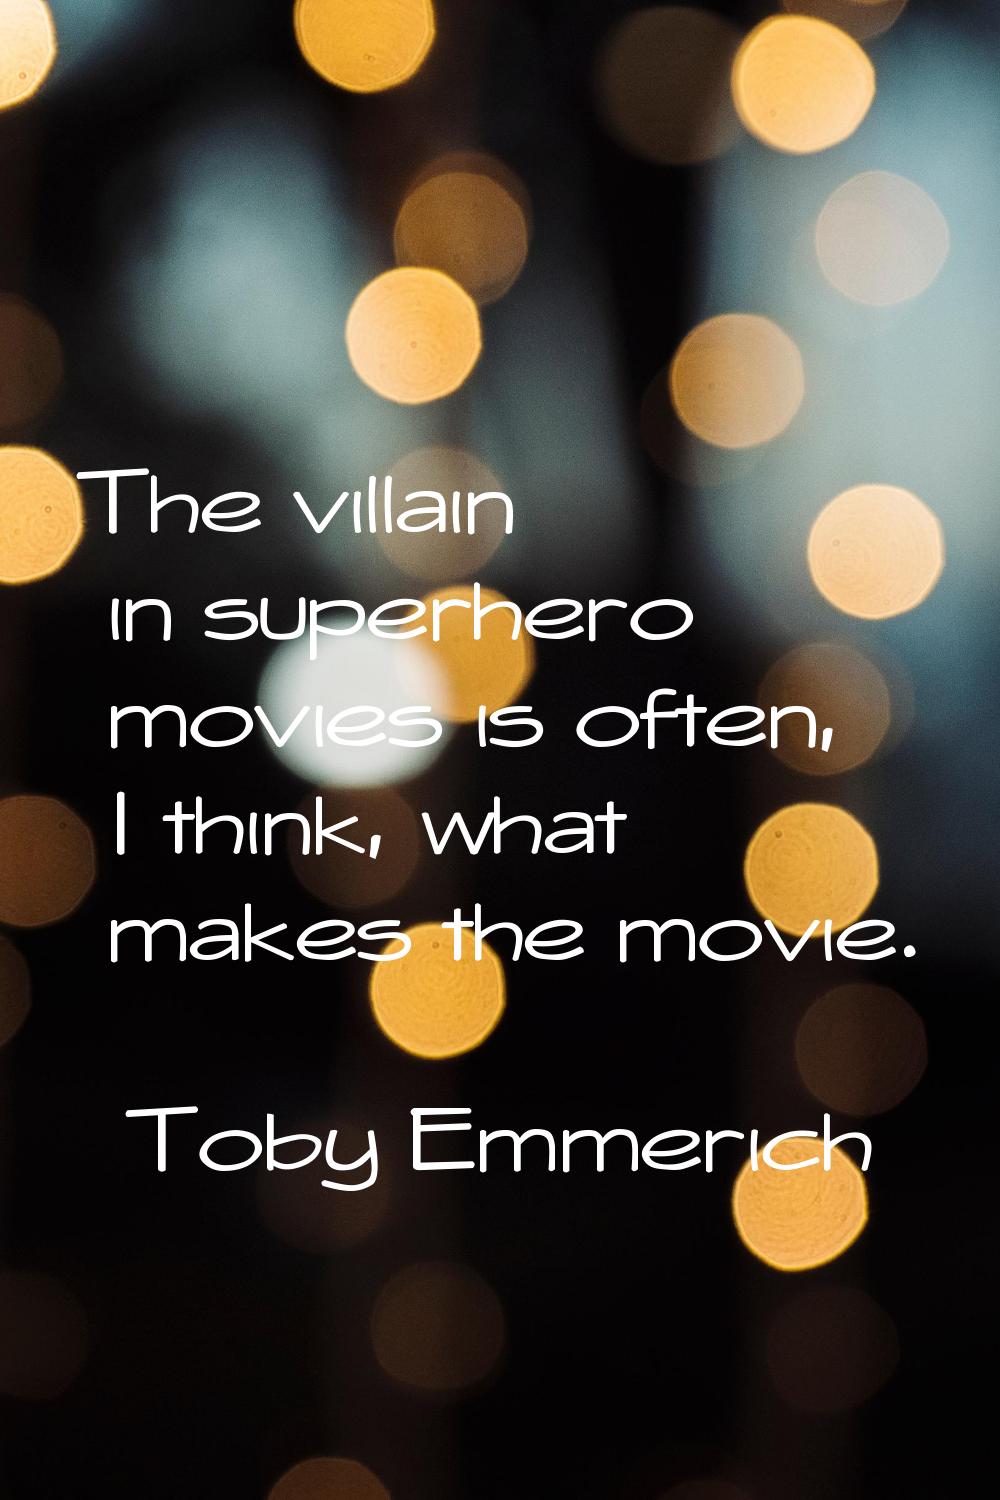 The villain in superhero movies is often, I think, what makes the movie.